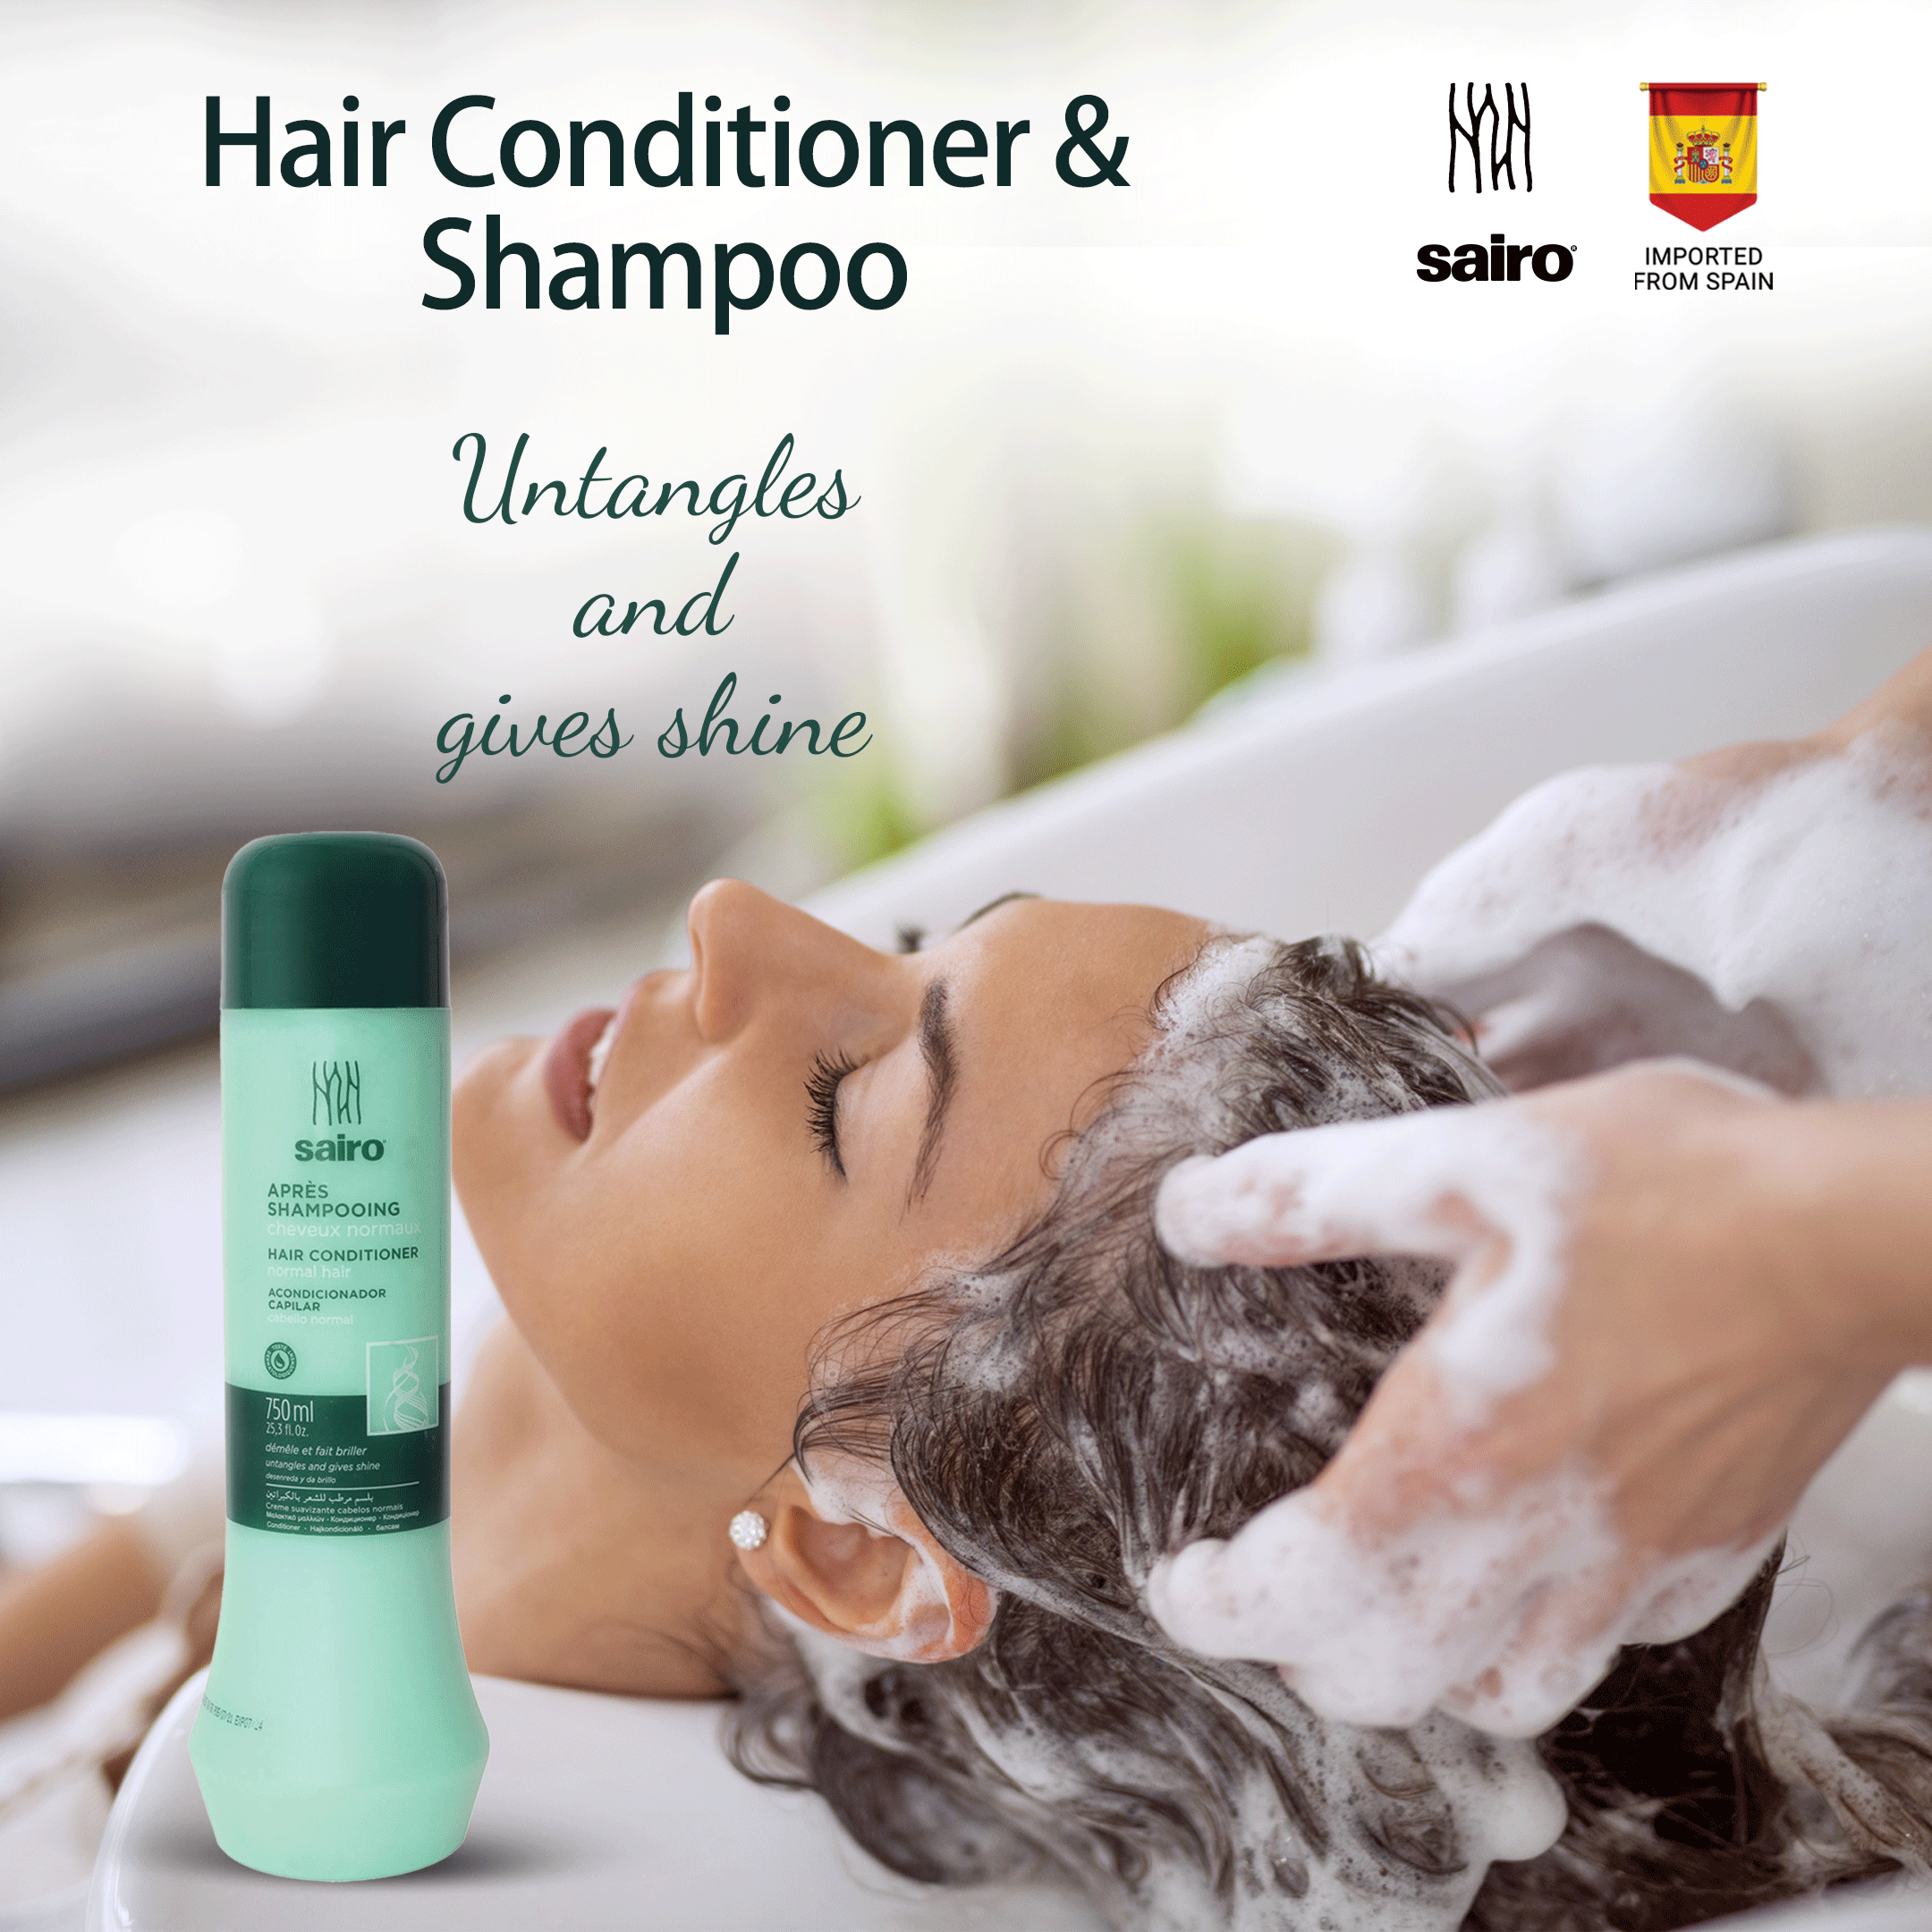 Hair Conditioner for Normal Hair - Sairo